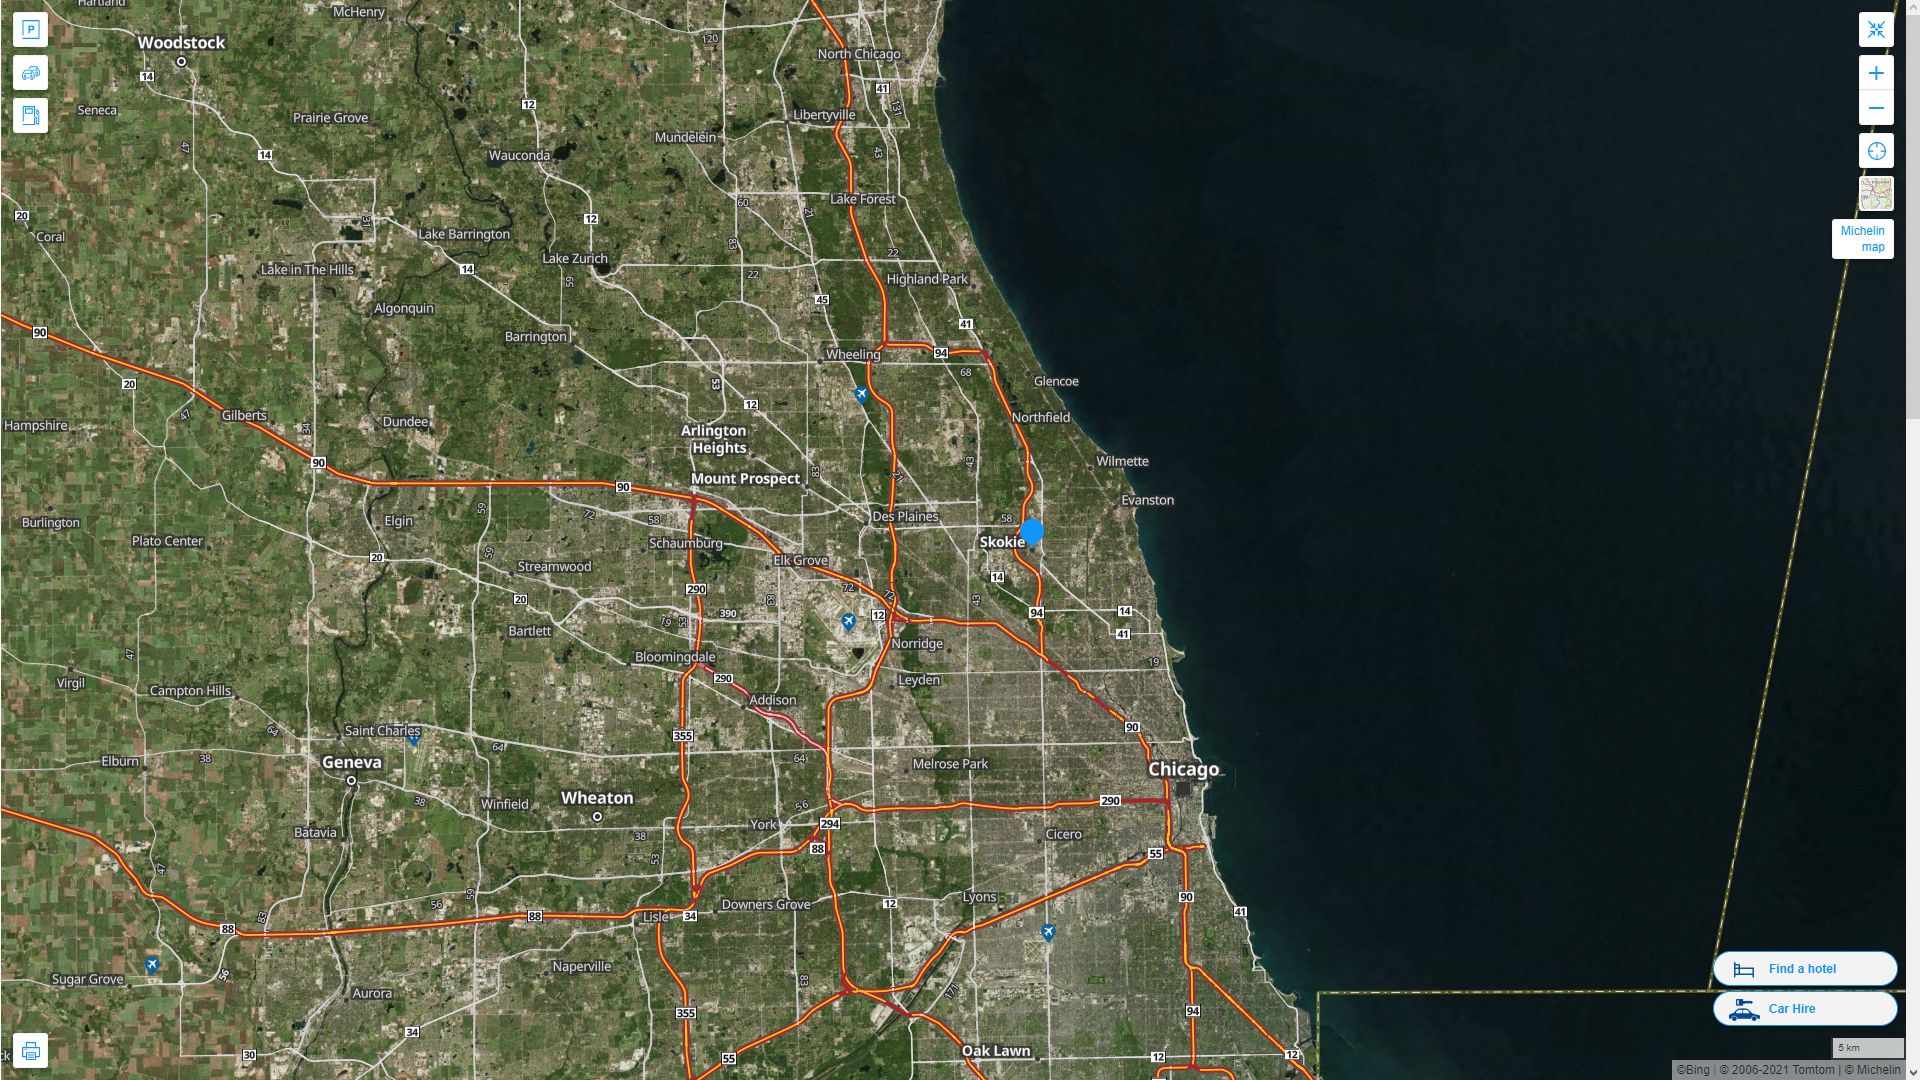 Skokie illinois Highway and Road Map with Satellite View